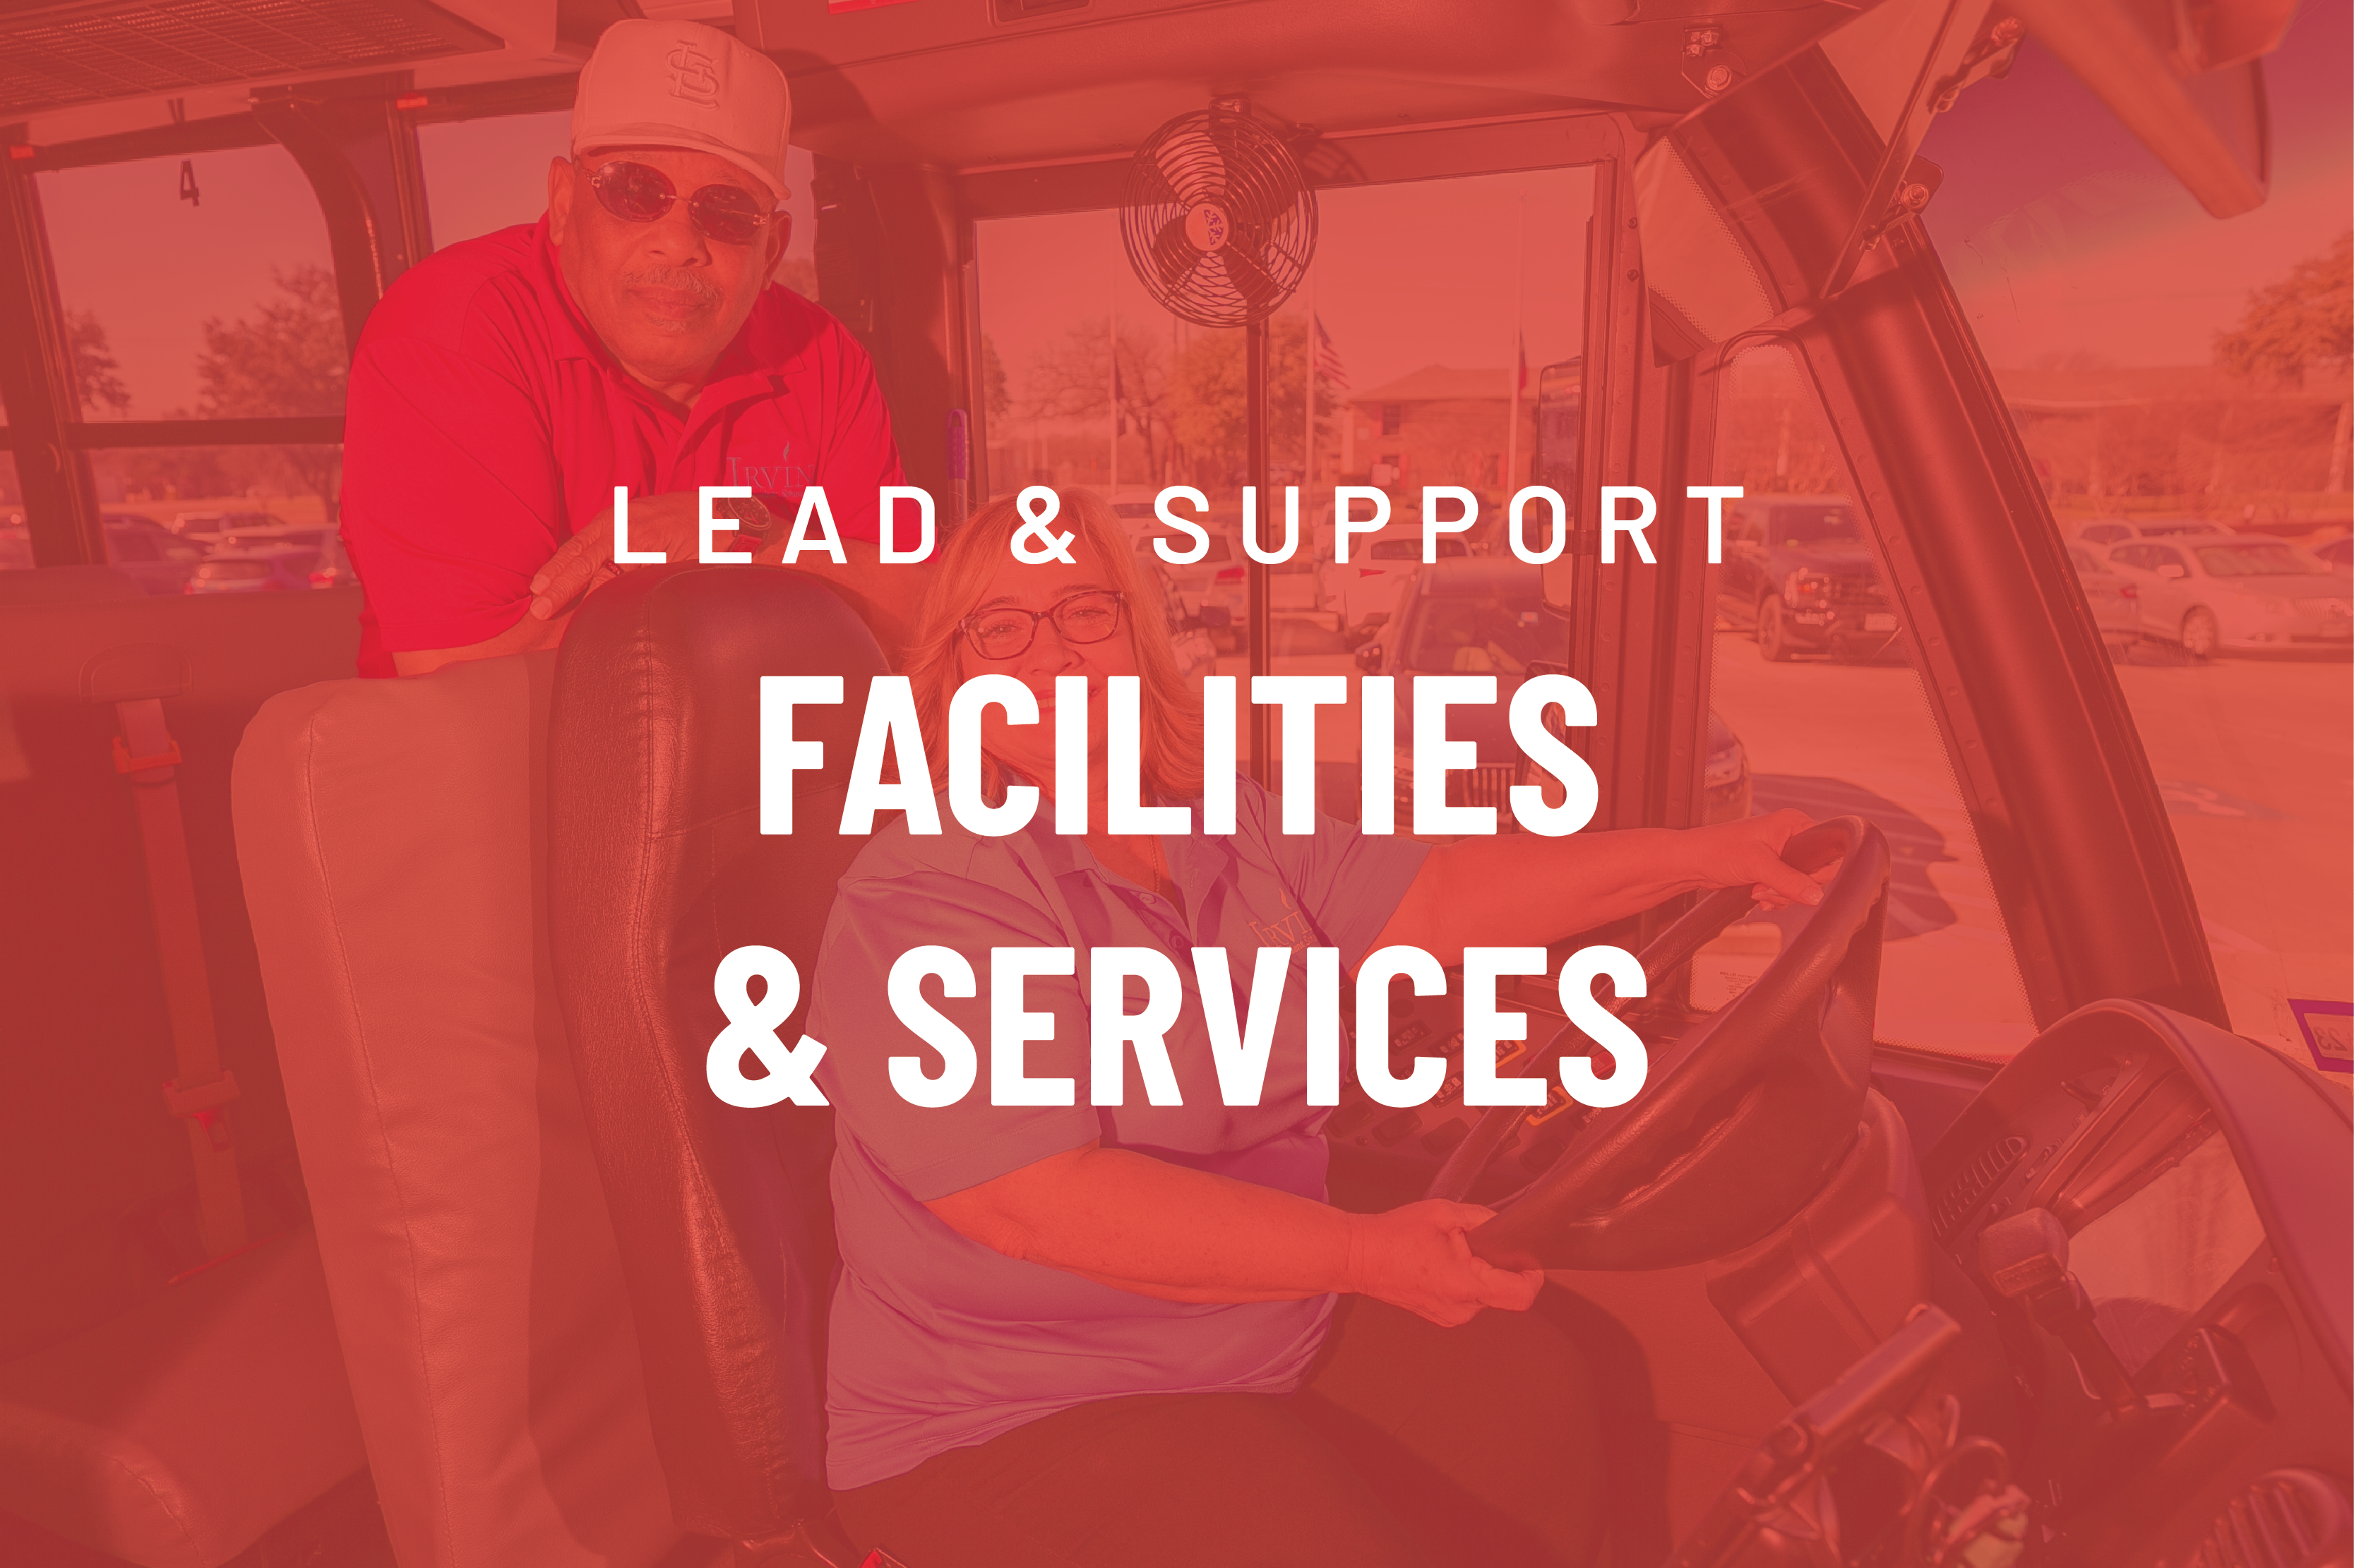 Lead & Support - Facilities & Services